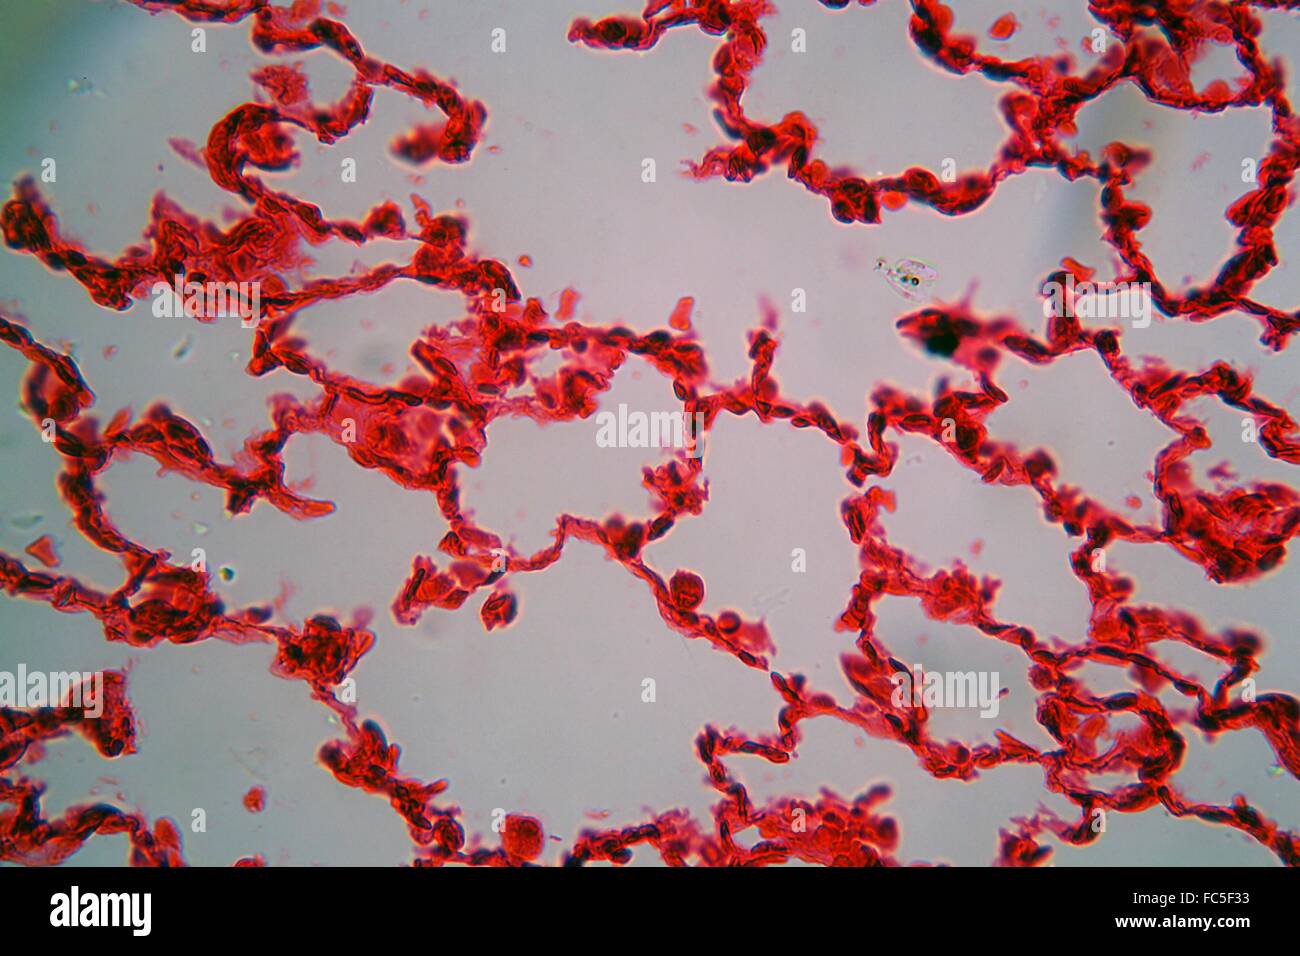 Lung cells under the microscope Stock Photo